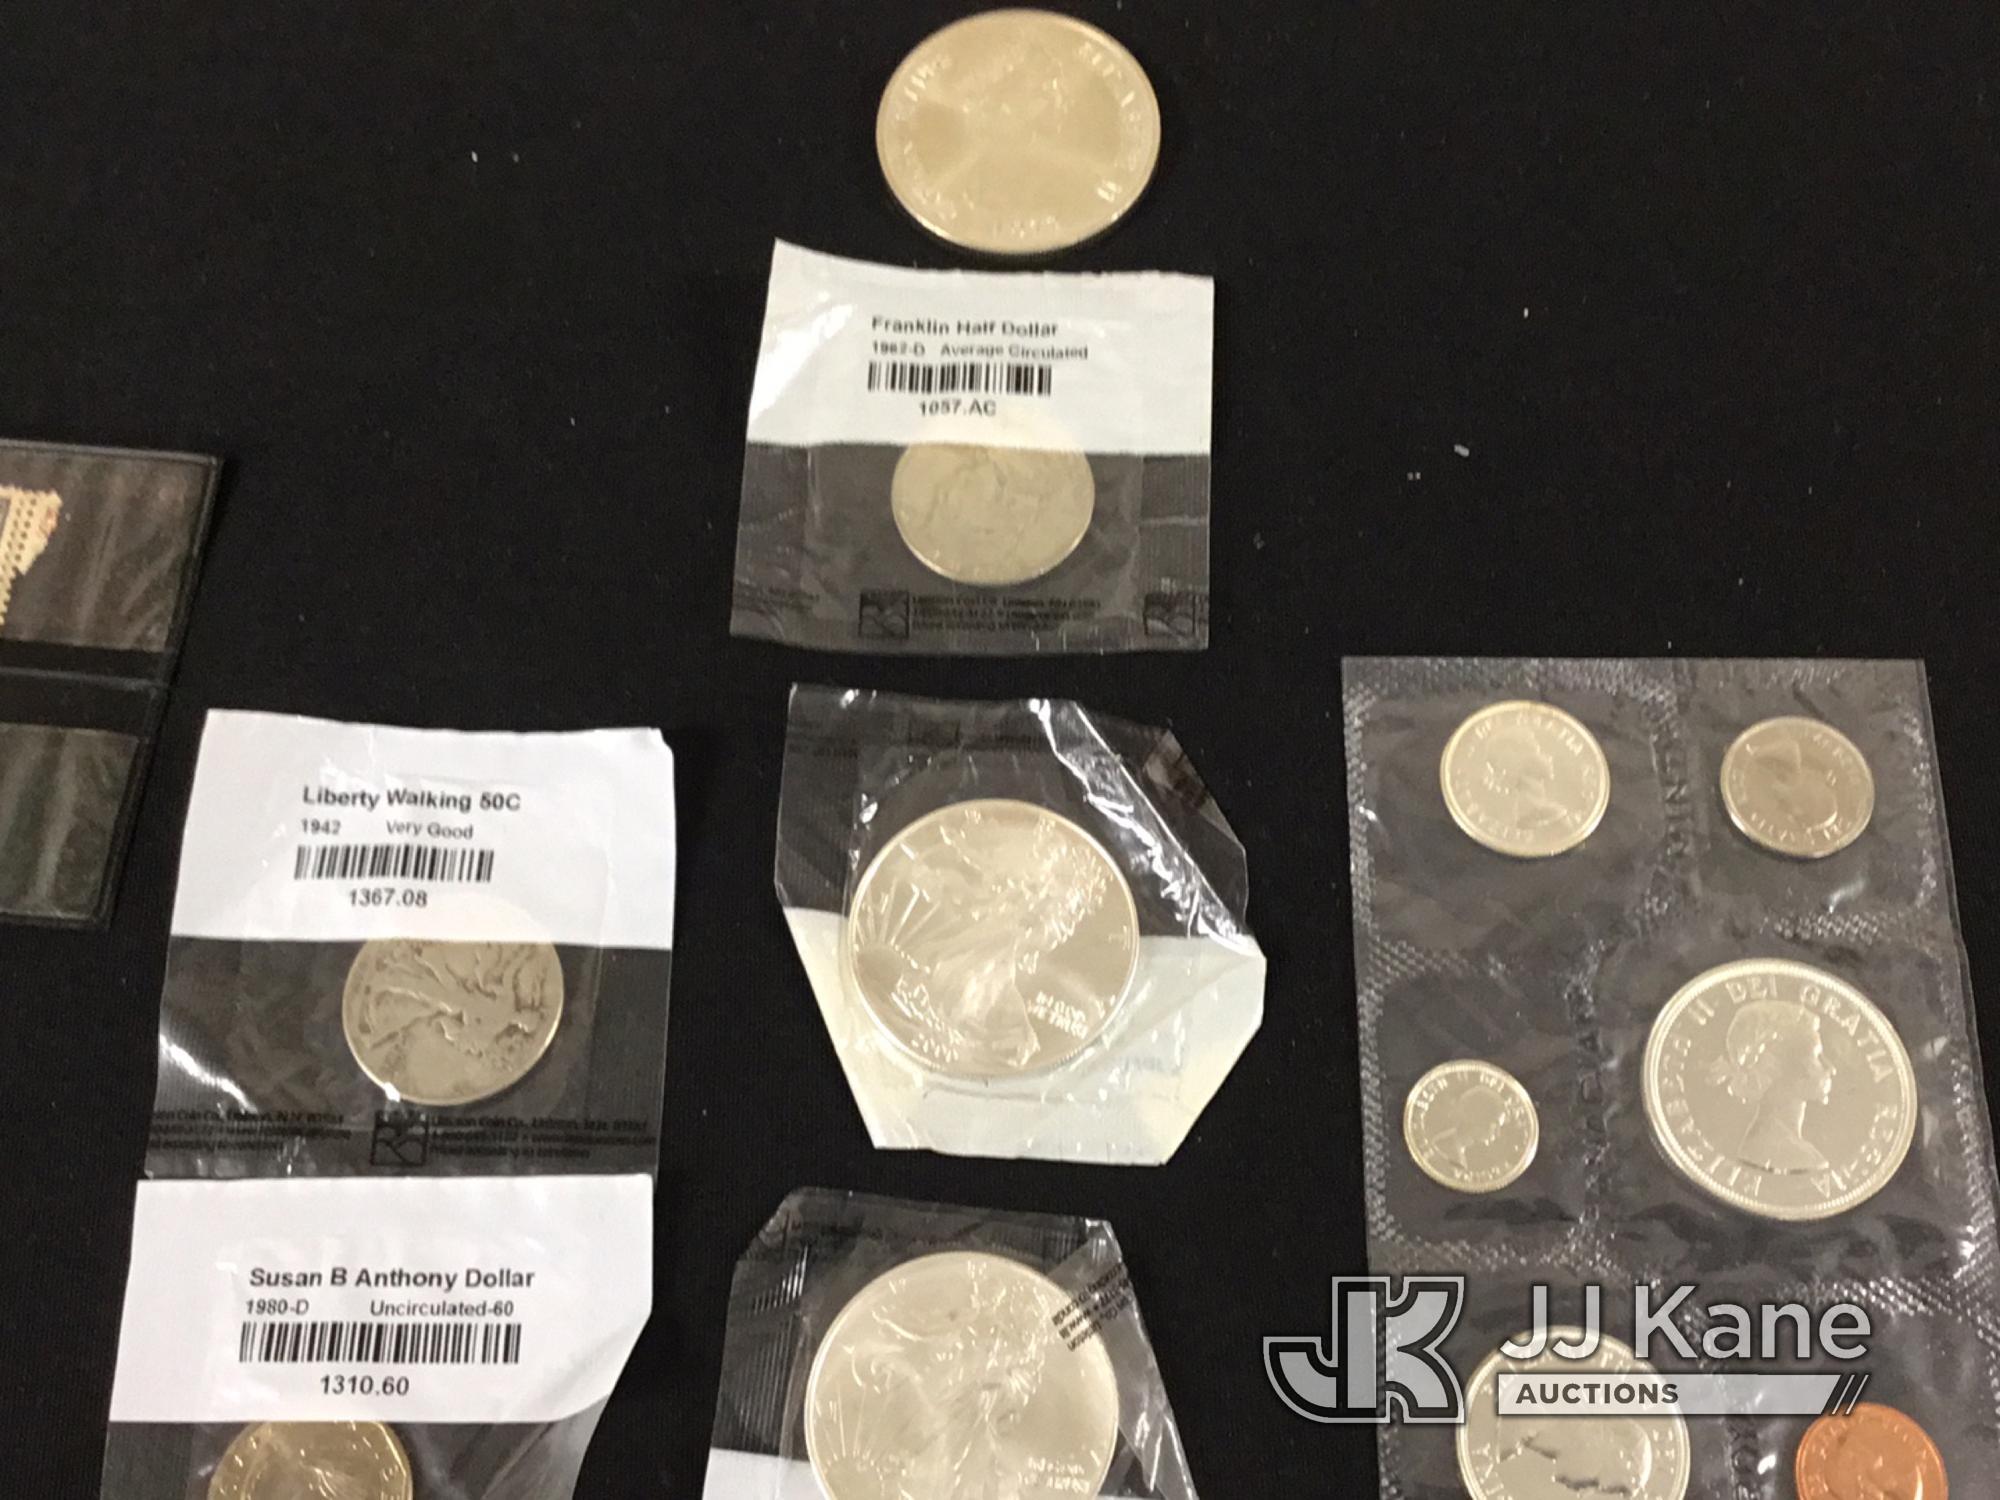 (Jurupa Valley, CA) Stamps | coins | authenticity unknown (Used) NOTE: This unit is being sold AS IS